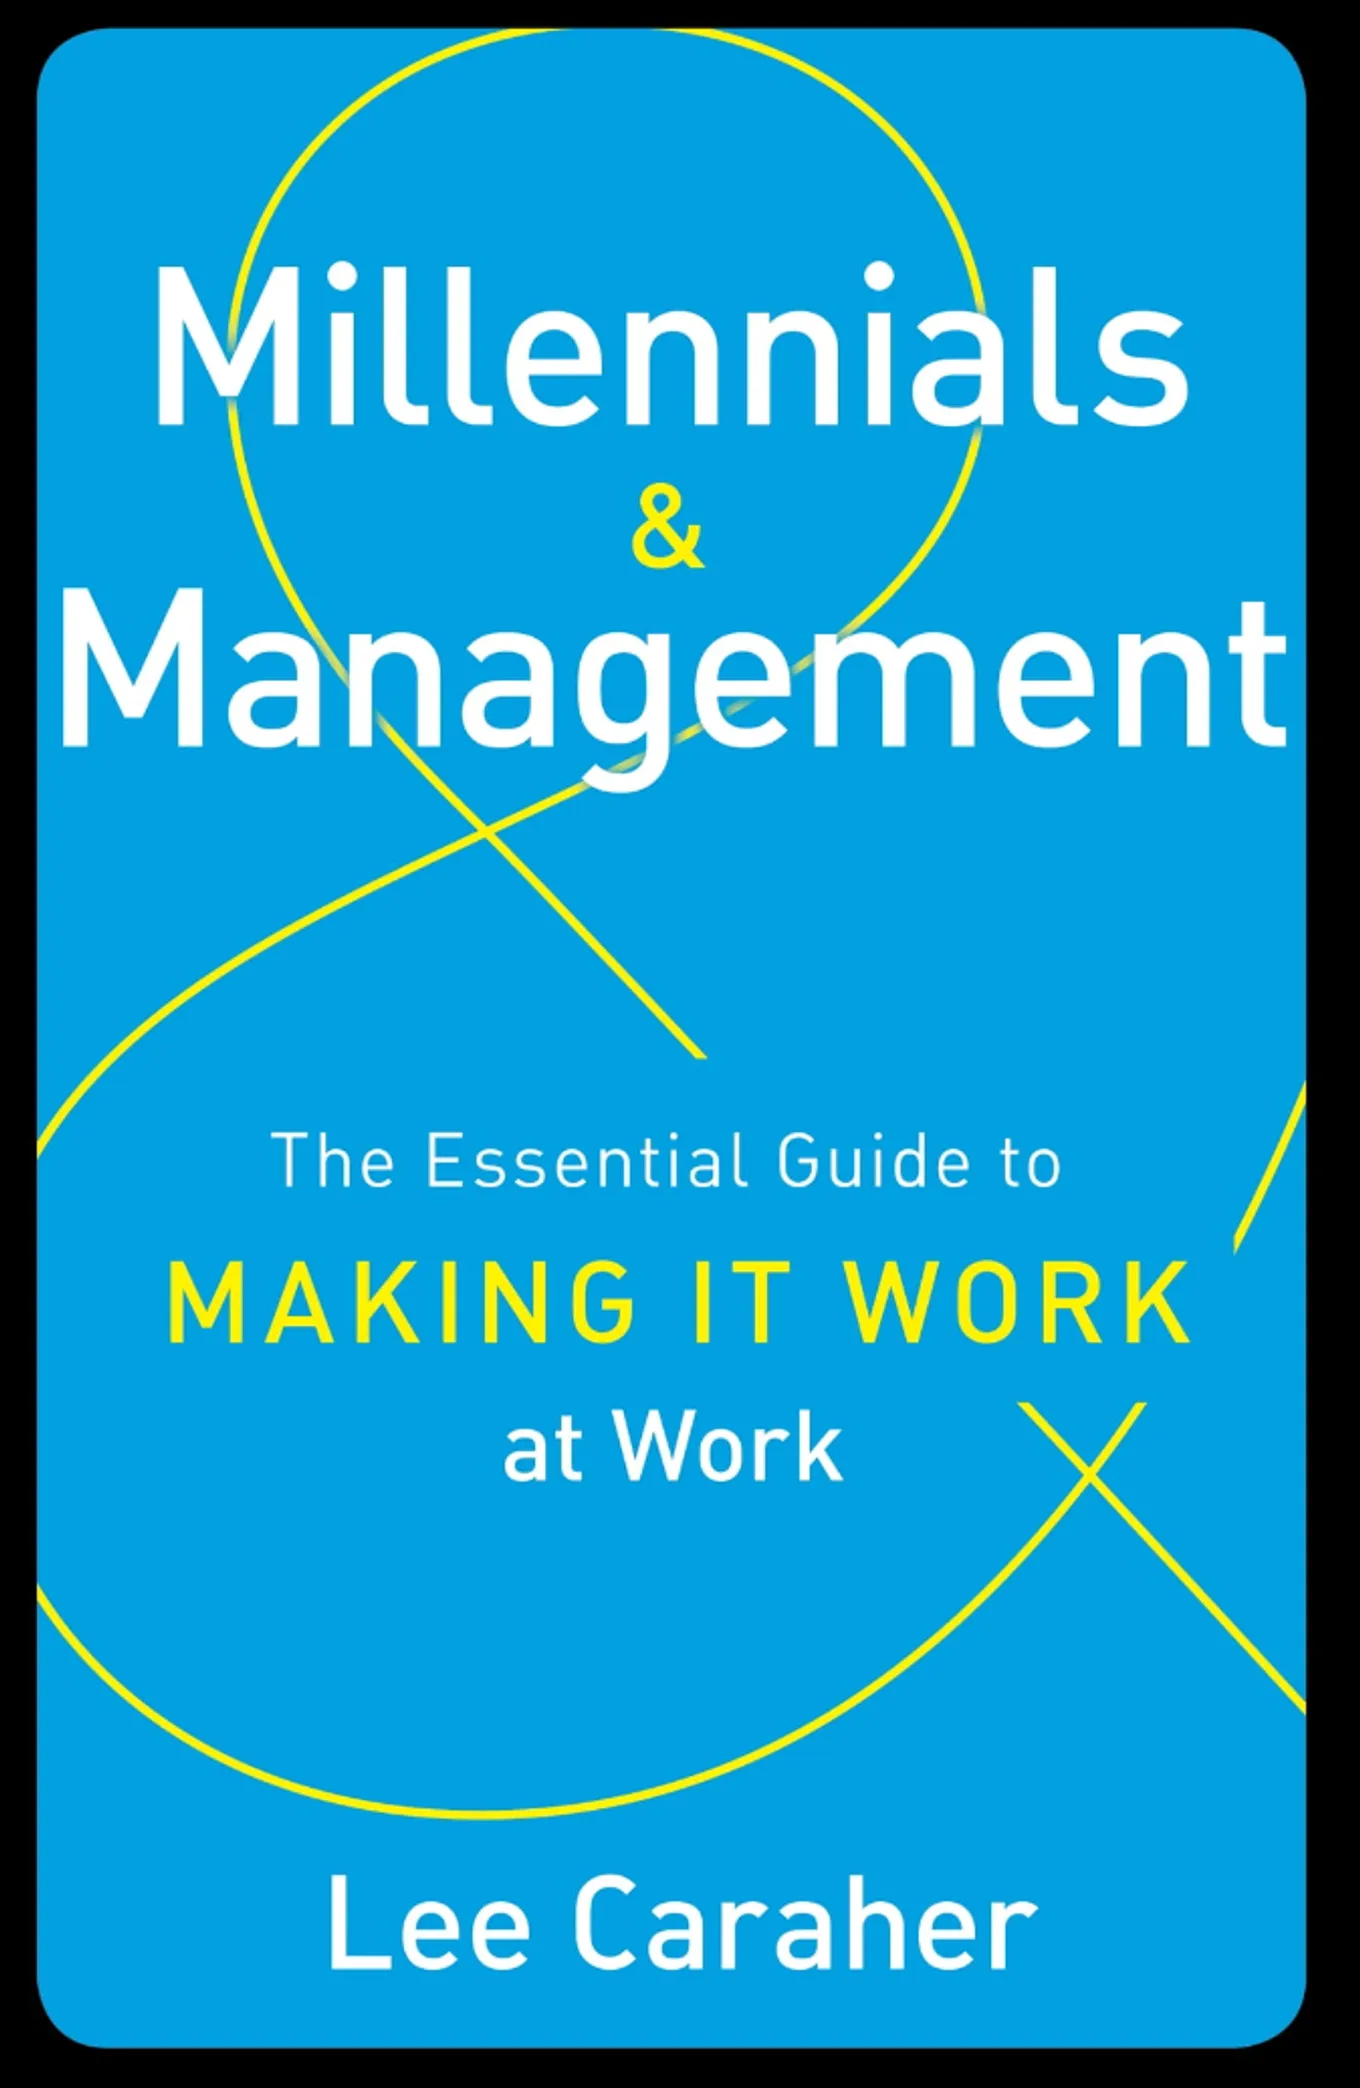 Millennials & Management: The Essential Guide to Making it Work at Work – Lee Caraher